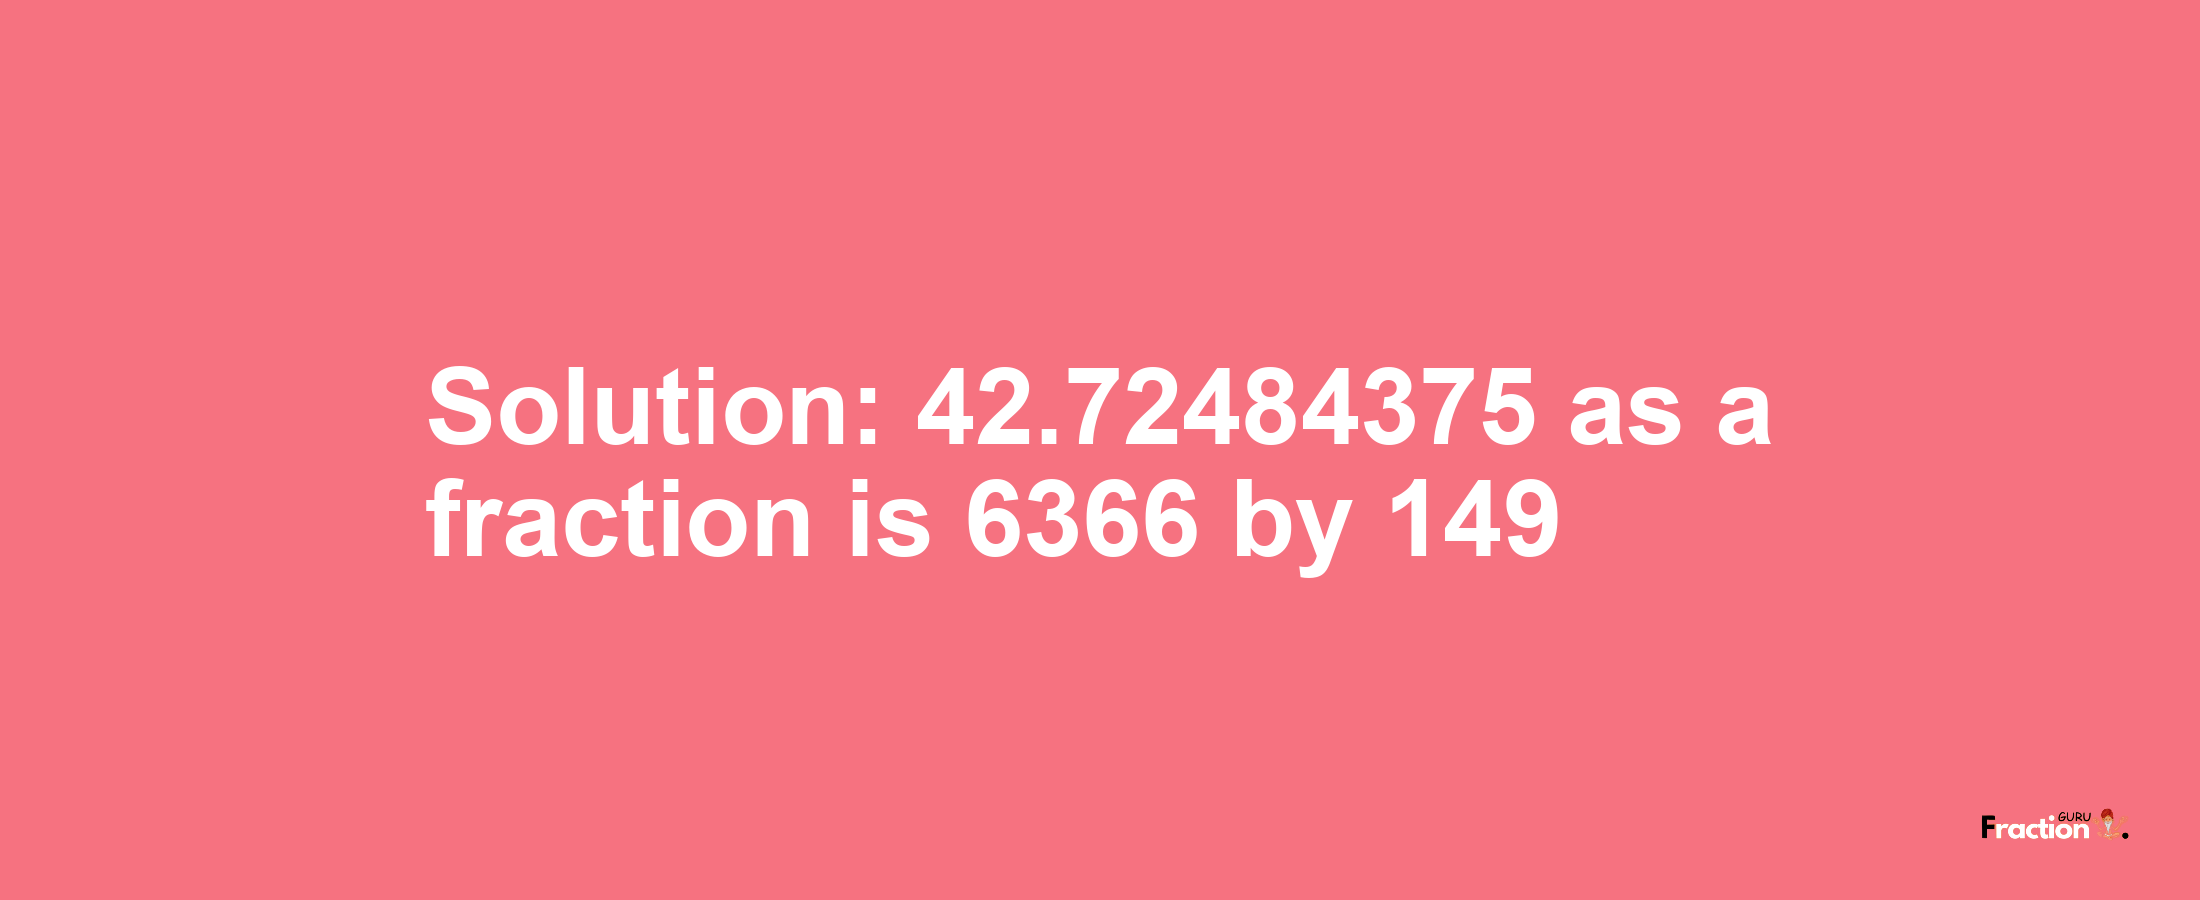 Solution:42.72484375 as a fraction is 6366/149